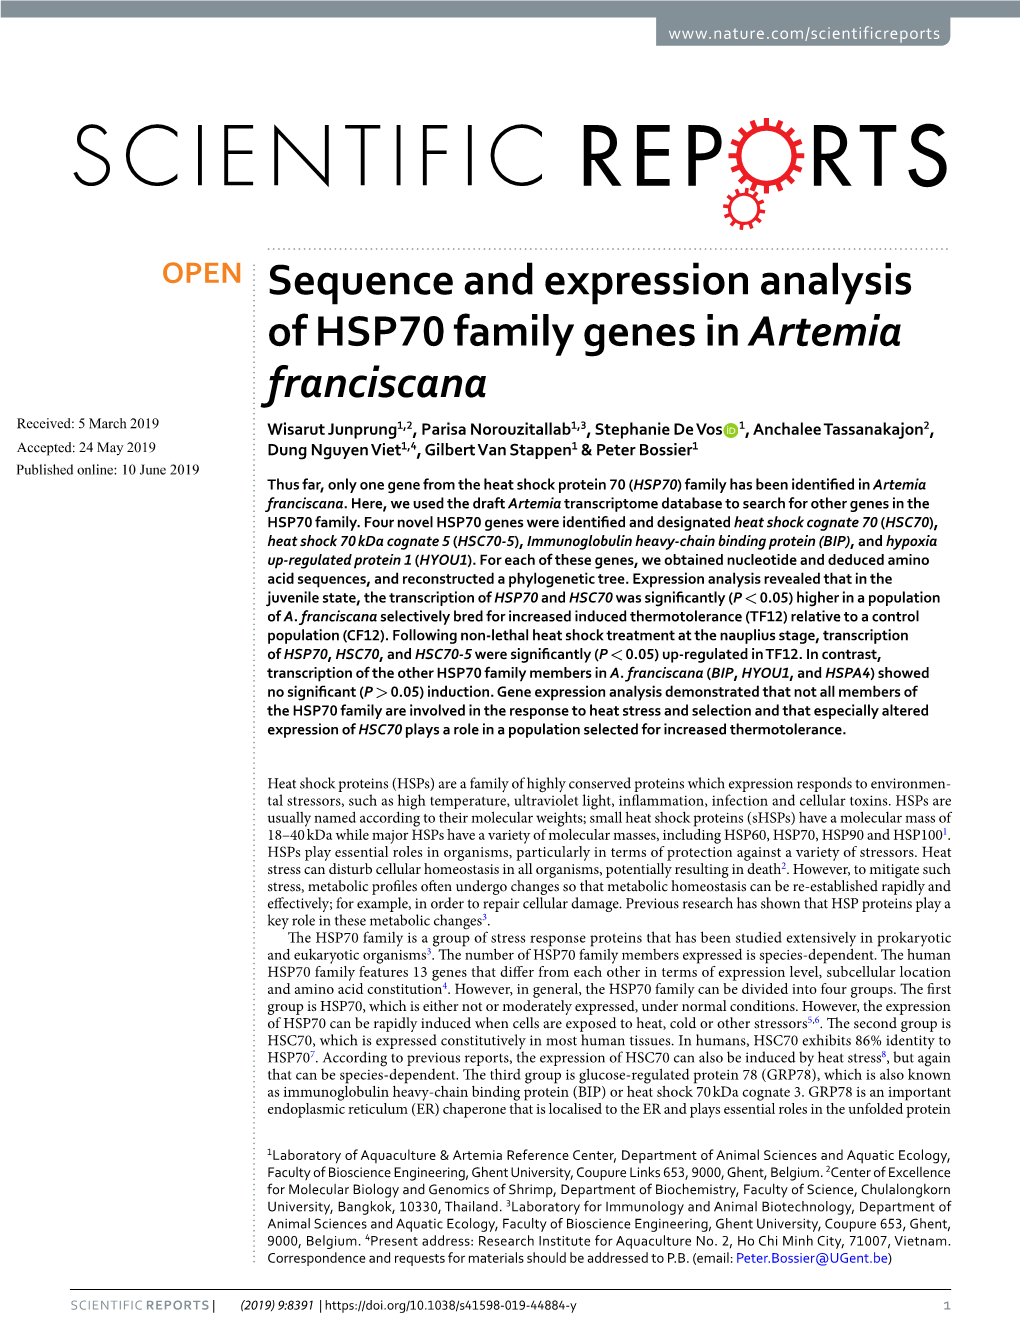 Sequence and Expression Analysis of HSP70 Family Genes in Artemia